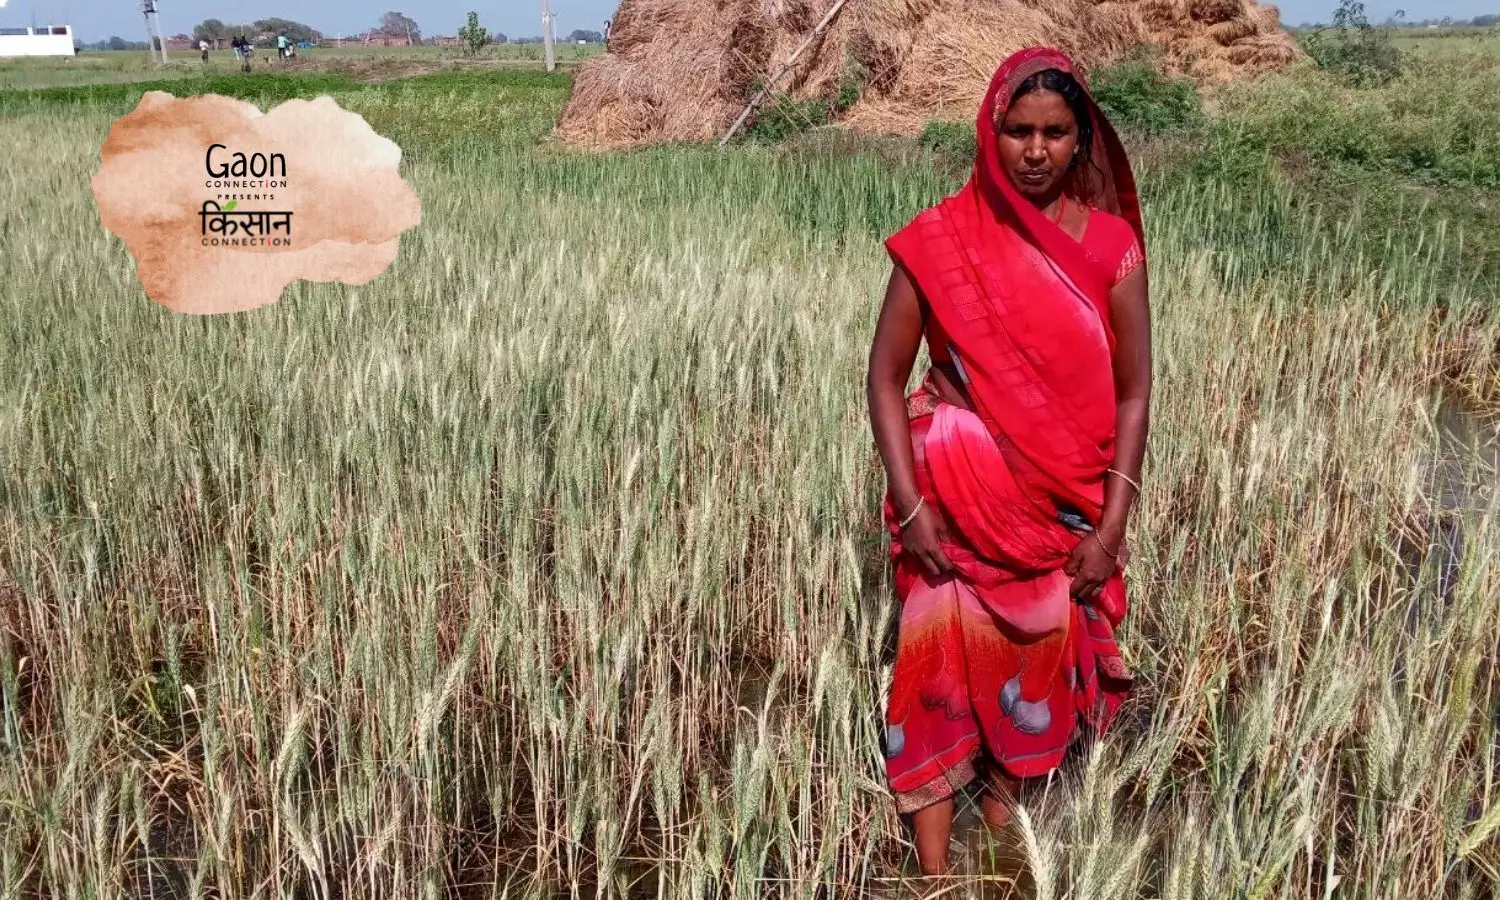 In Scorching Summer Heat, a Flood of Woes for Wheat Farmers in Chandauli, UP